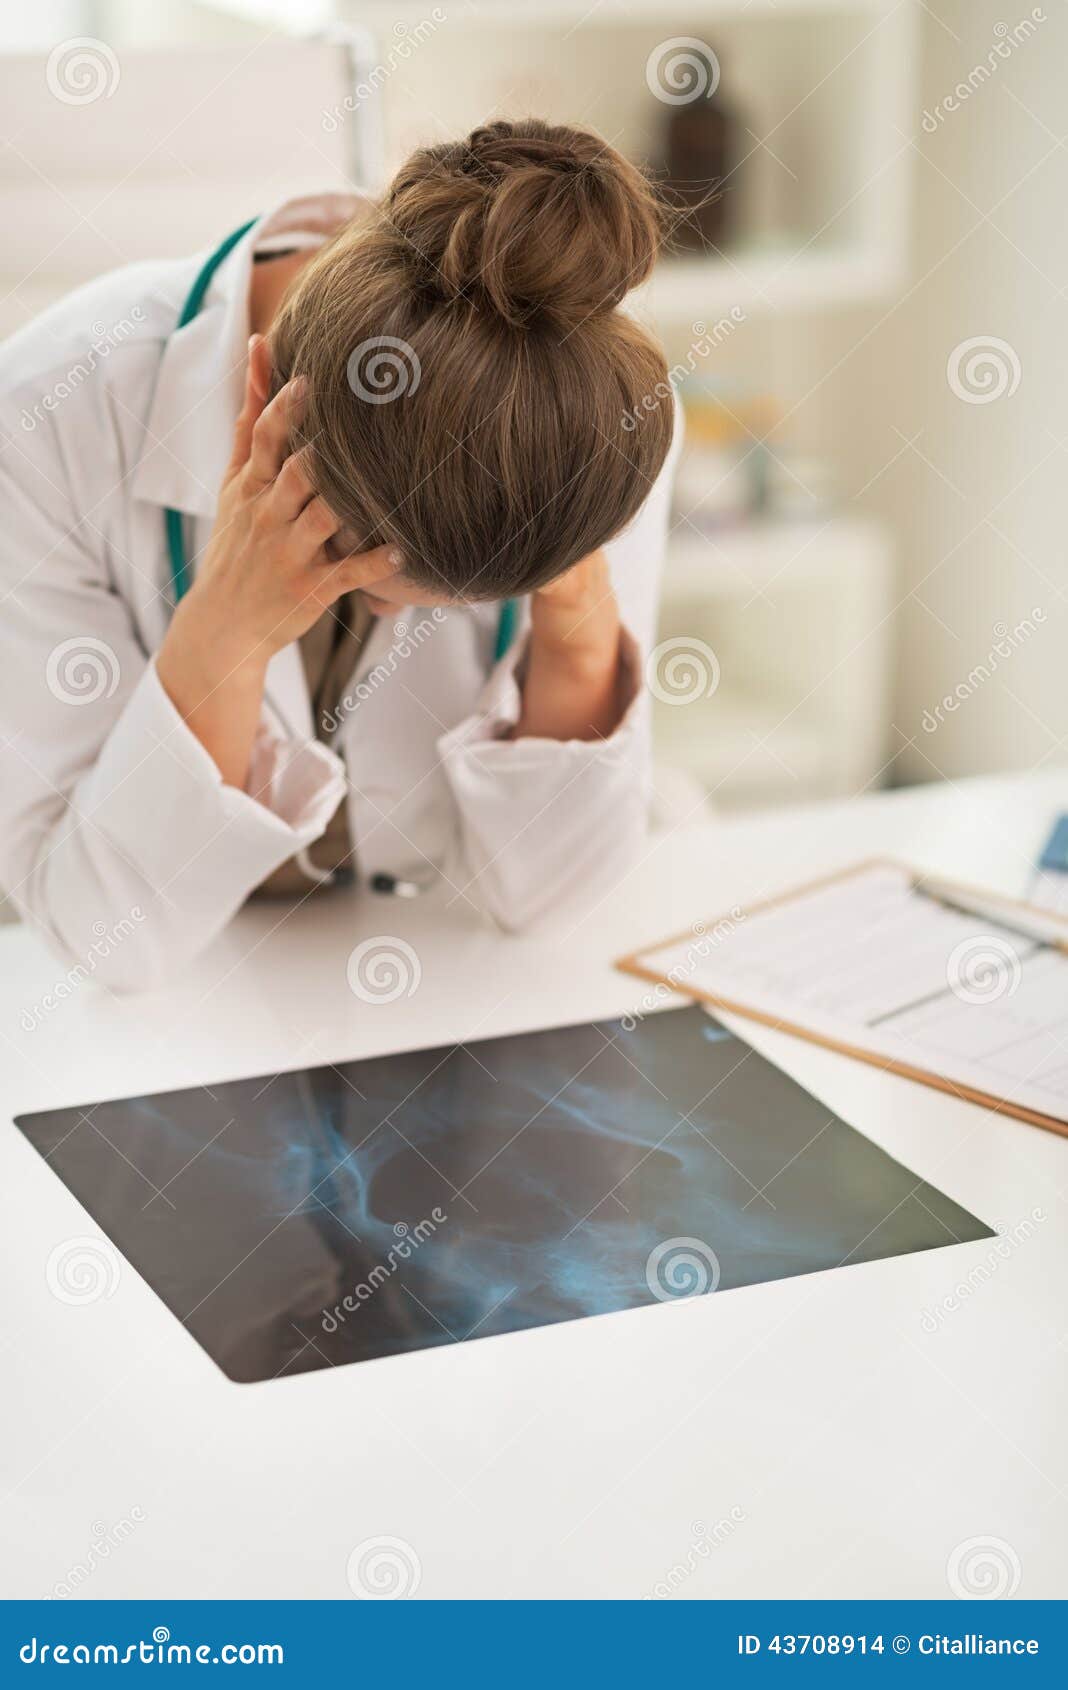 stressed doctor woman with fluorography